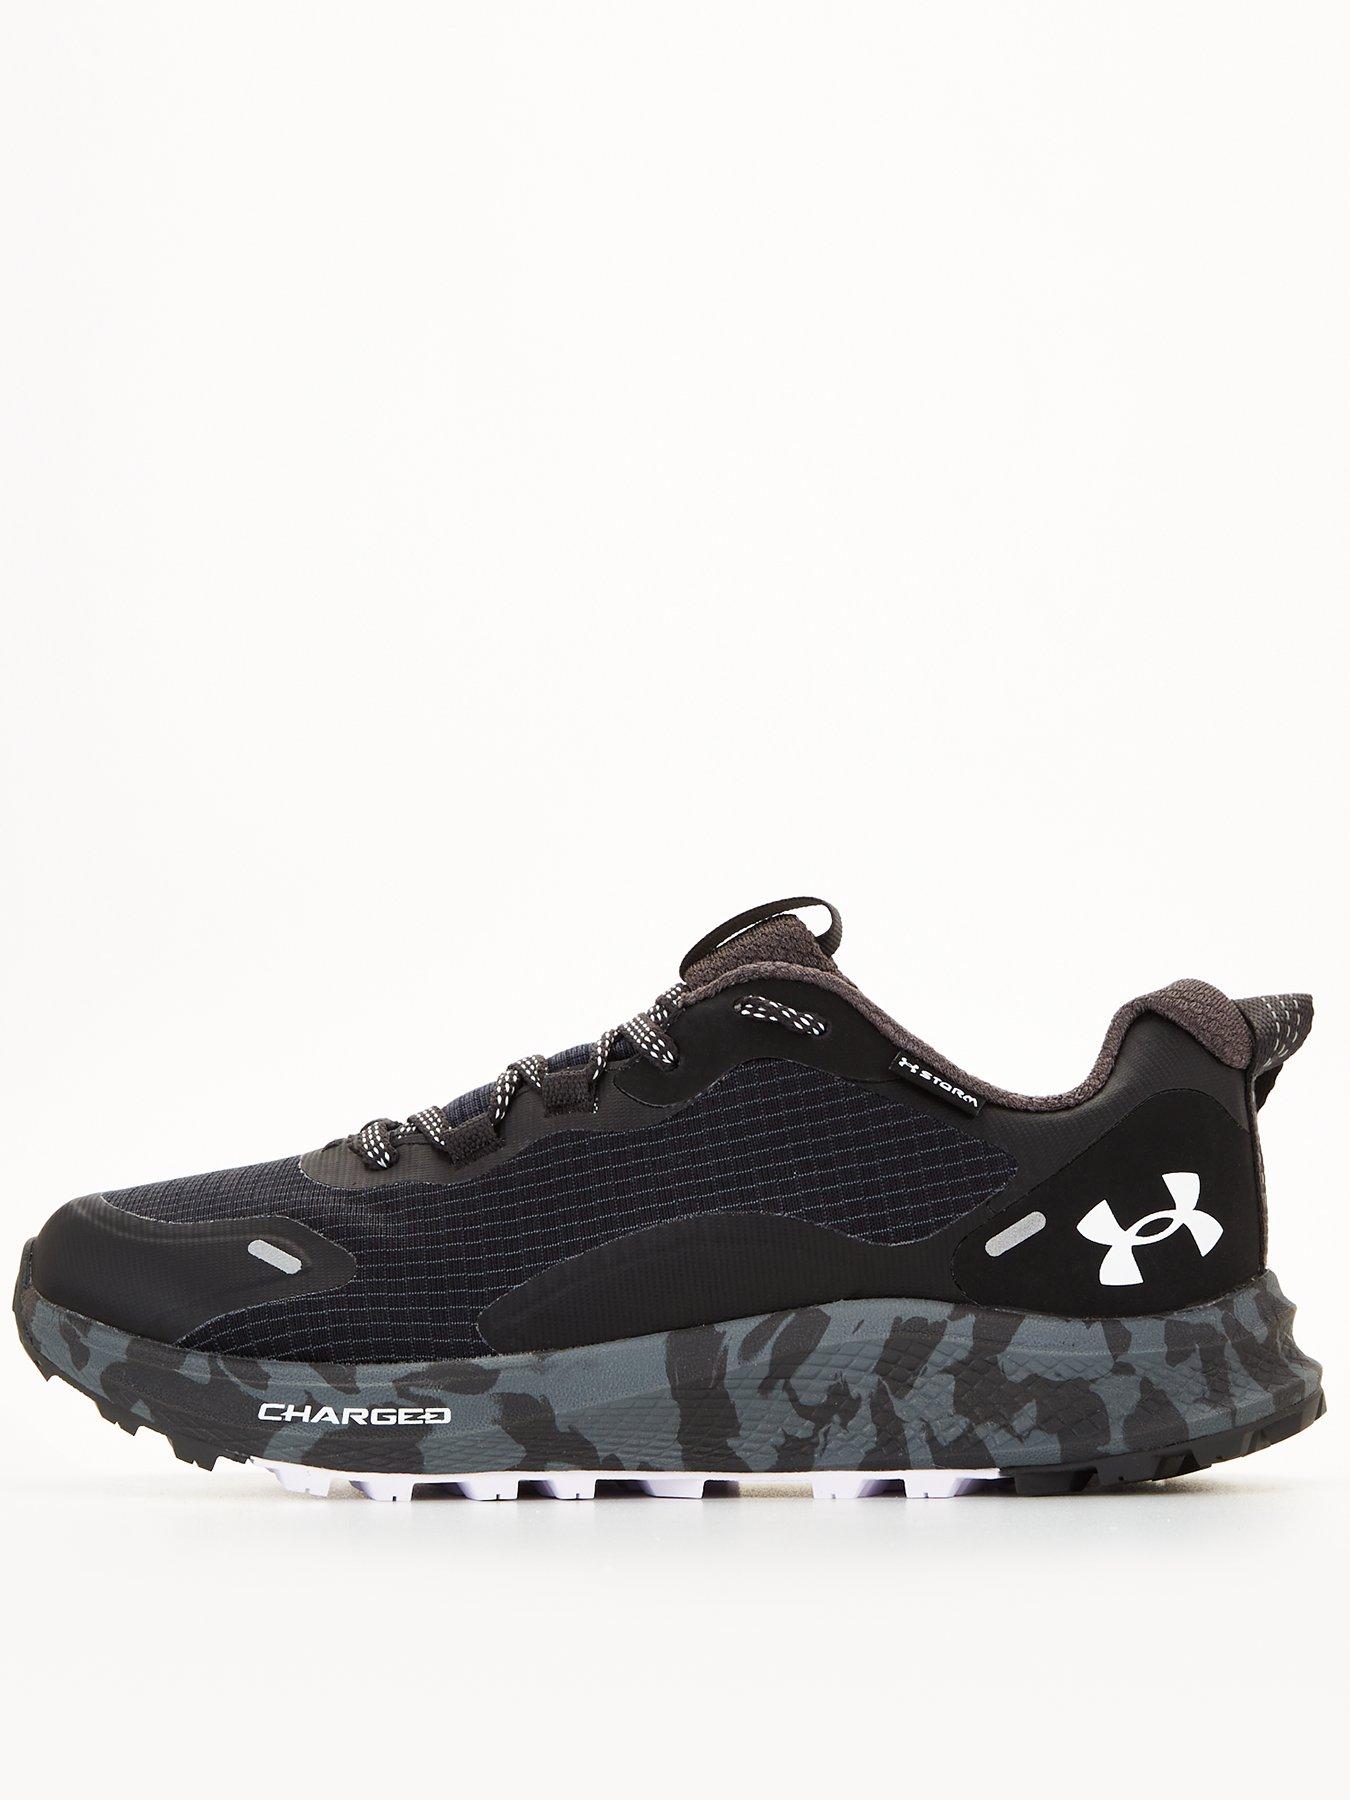 UNDER ARMOUR Charged Bandit Trail 2 SP - Black/Multi very.co.uk